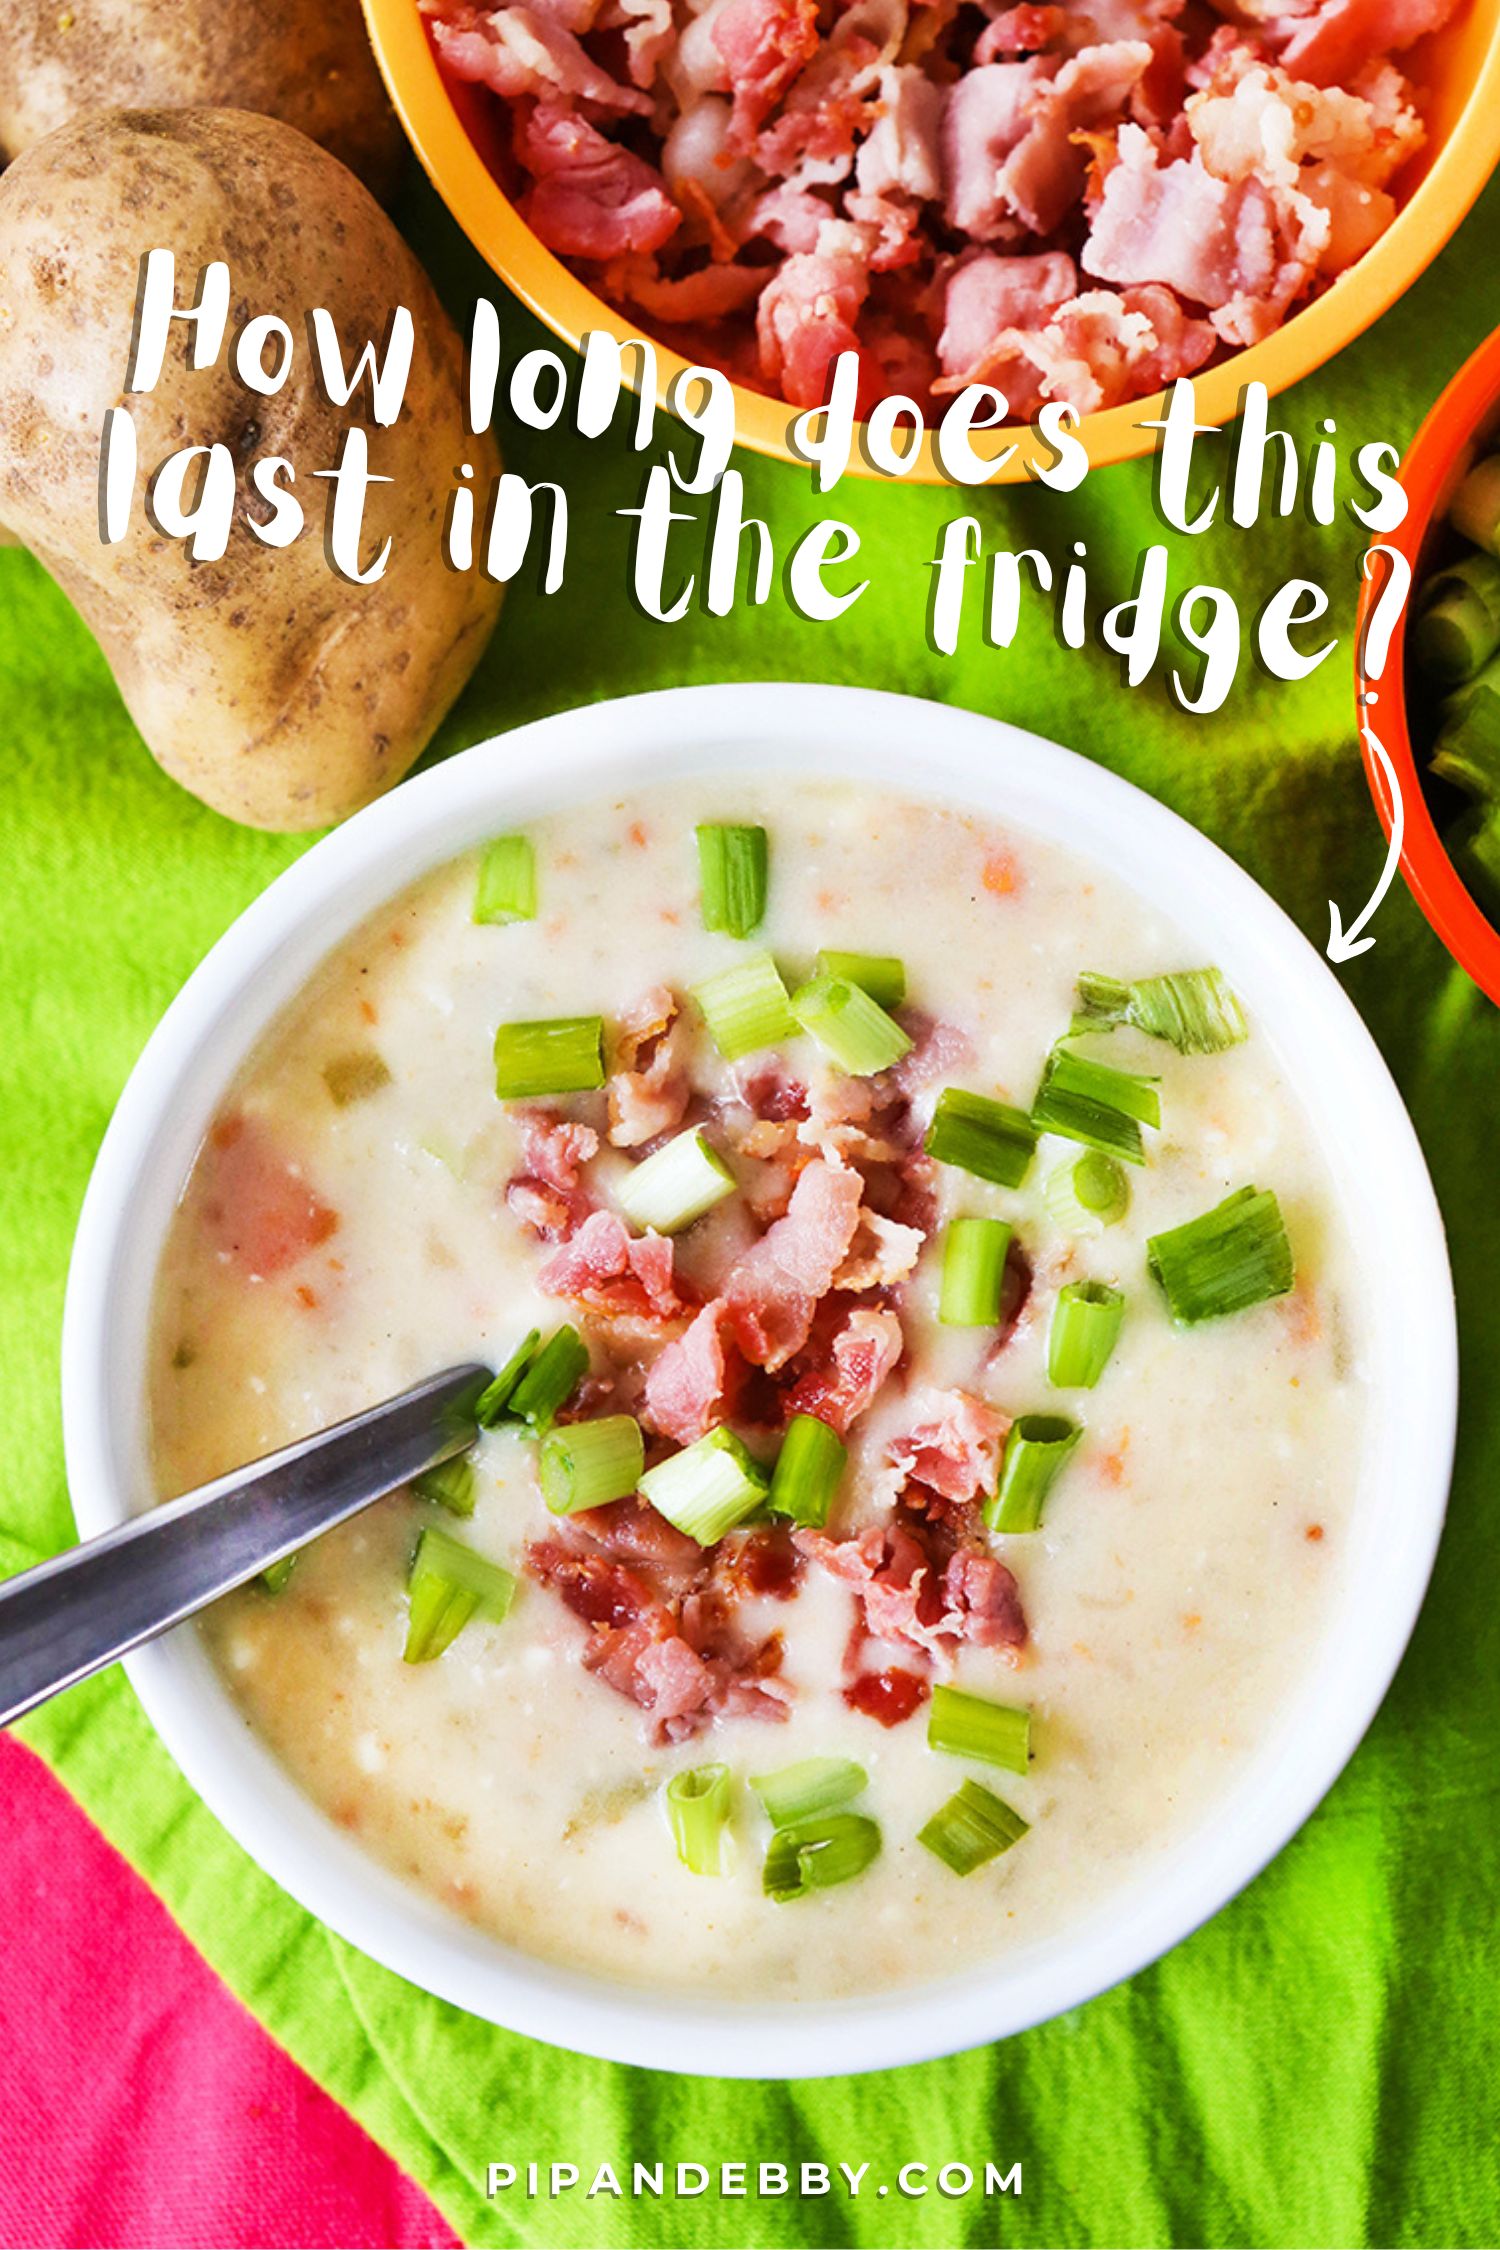 Bowl of loaded potato soup with text overlay reading, "How long does this last in the fridge?"